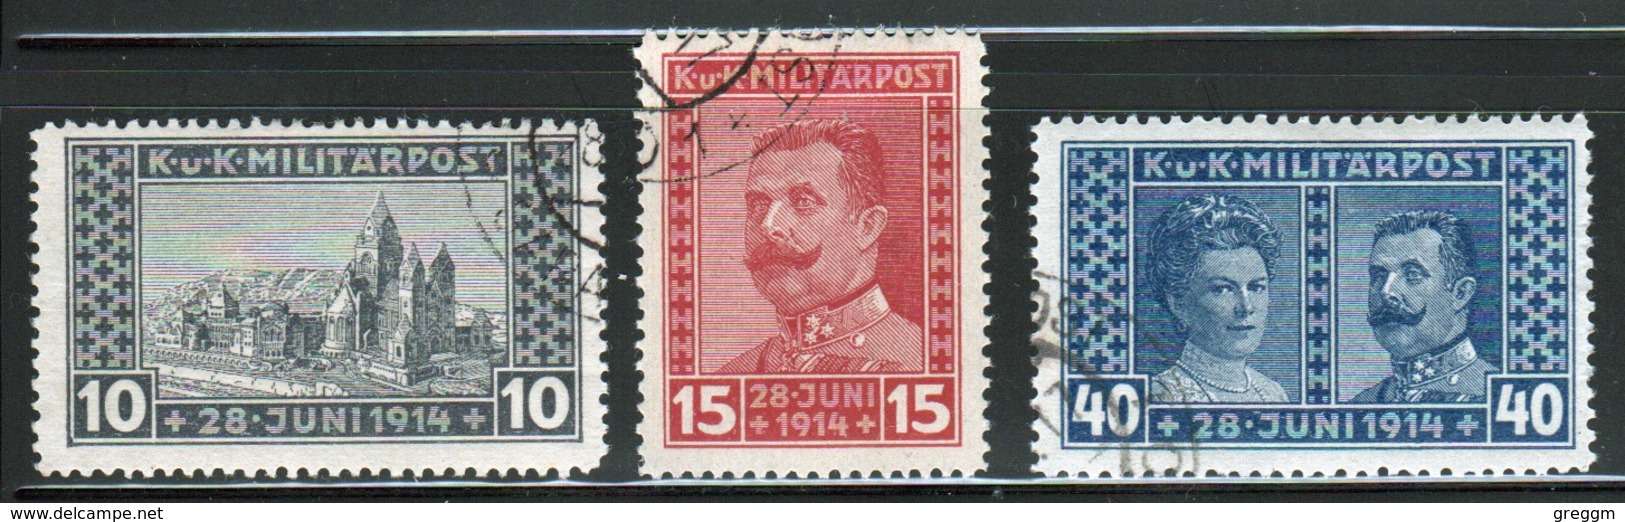 Bosnia Military Post Assassination Of Archduke Ferdinand Fund Set Of Stamps From 1917 In Fine Used Condition. - Bosnia And Herzegovina